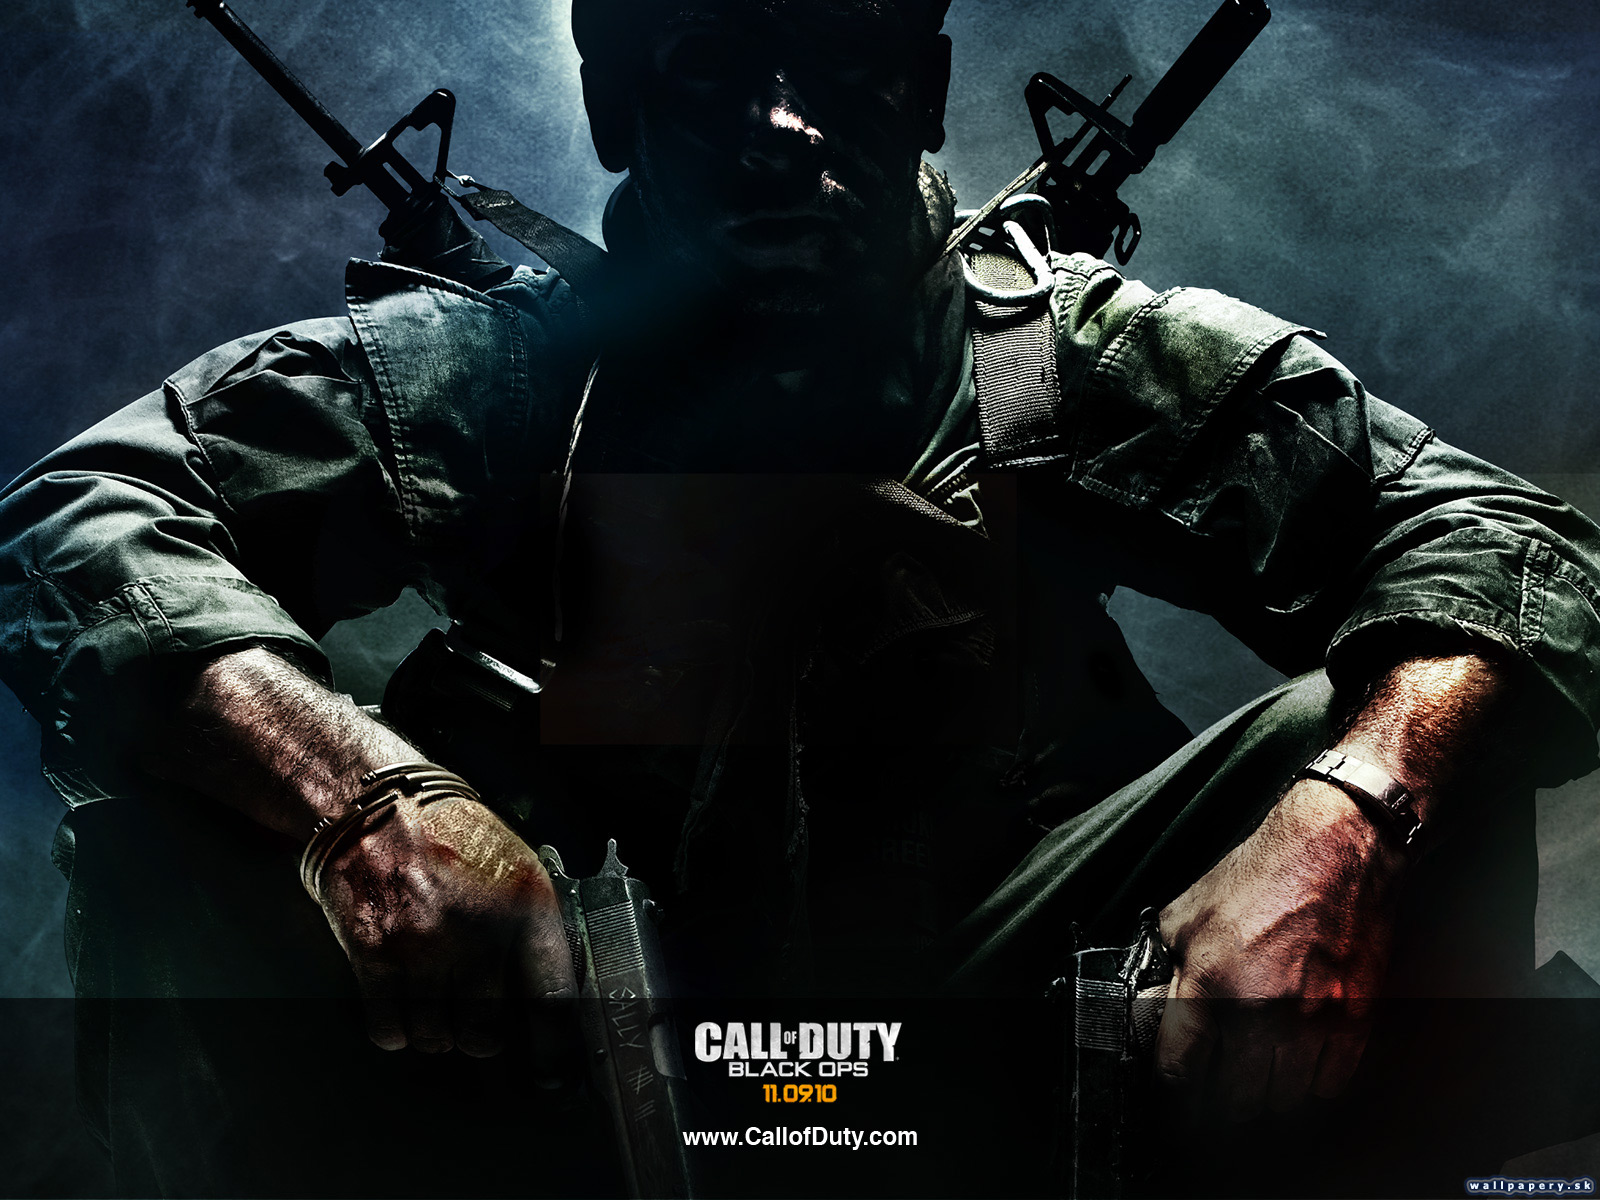 Call of Duty: Black Ops - wallpaper 1